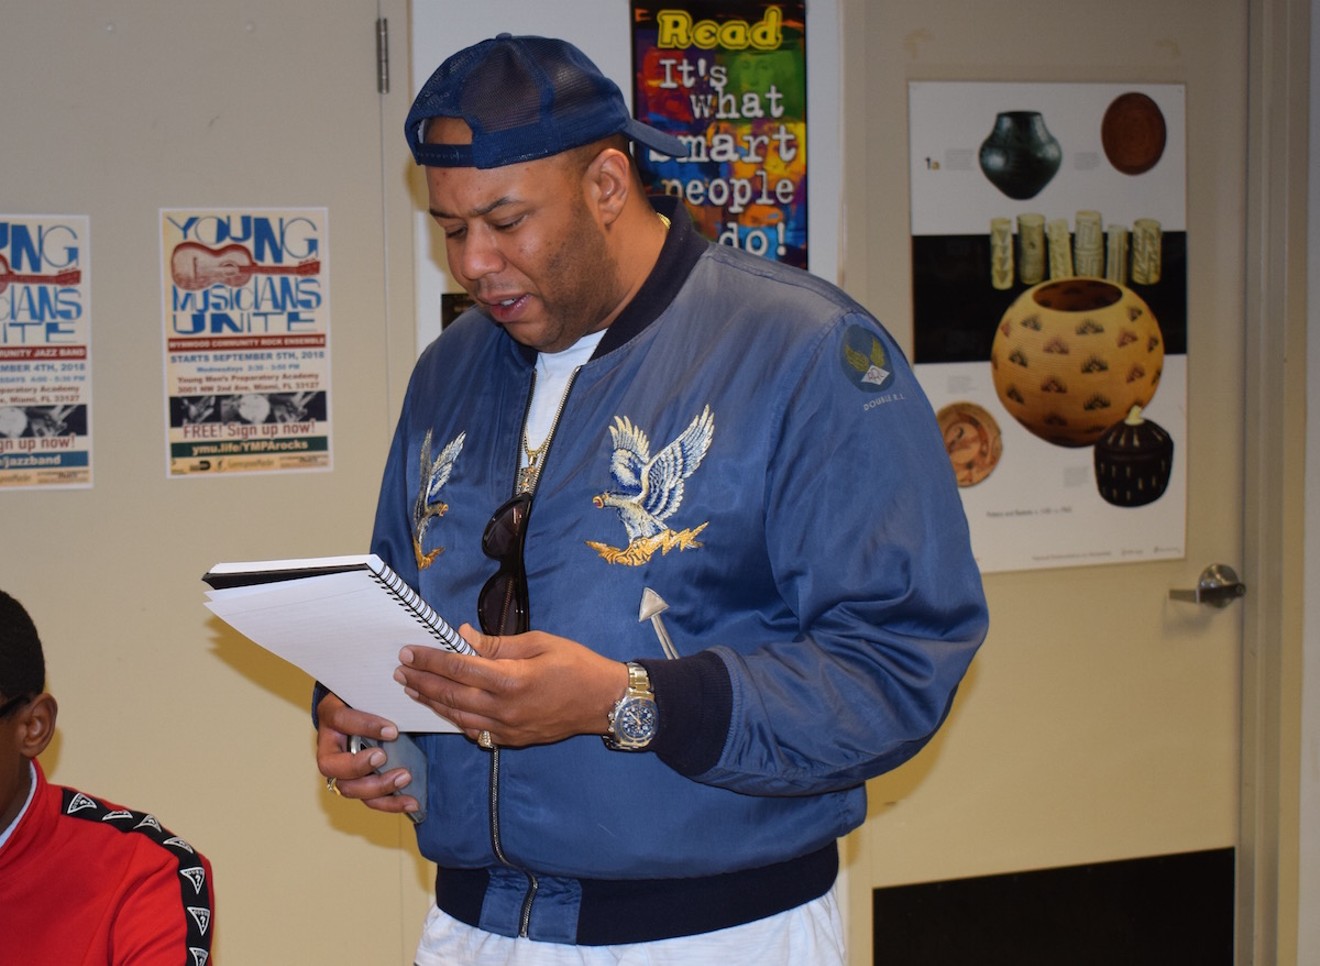 Karl "Dice Raw" Jenkins led a workshop for ninth-graders ahead of his performance in the musical Henry Box Brown.